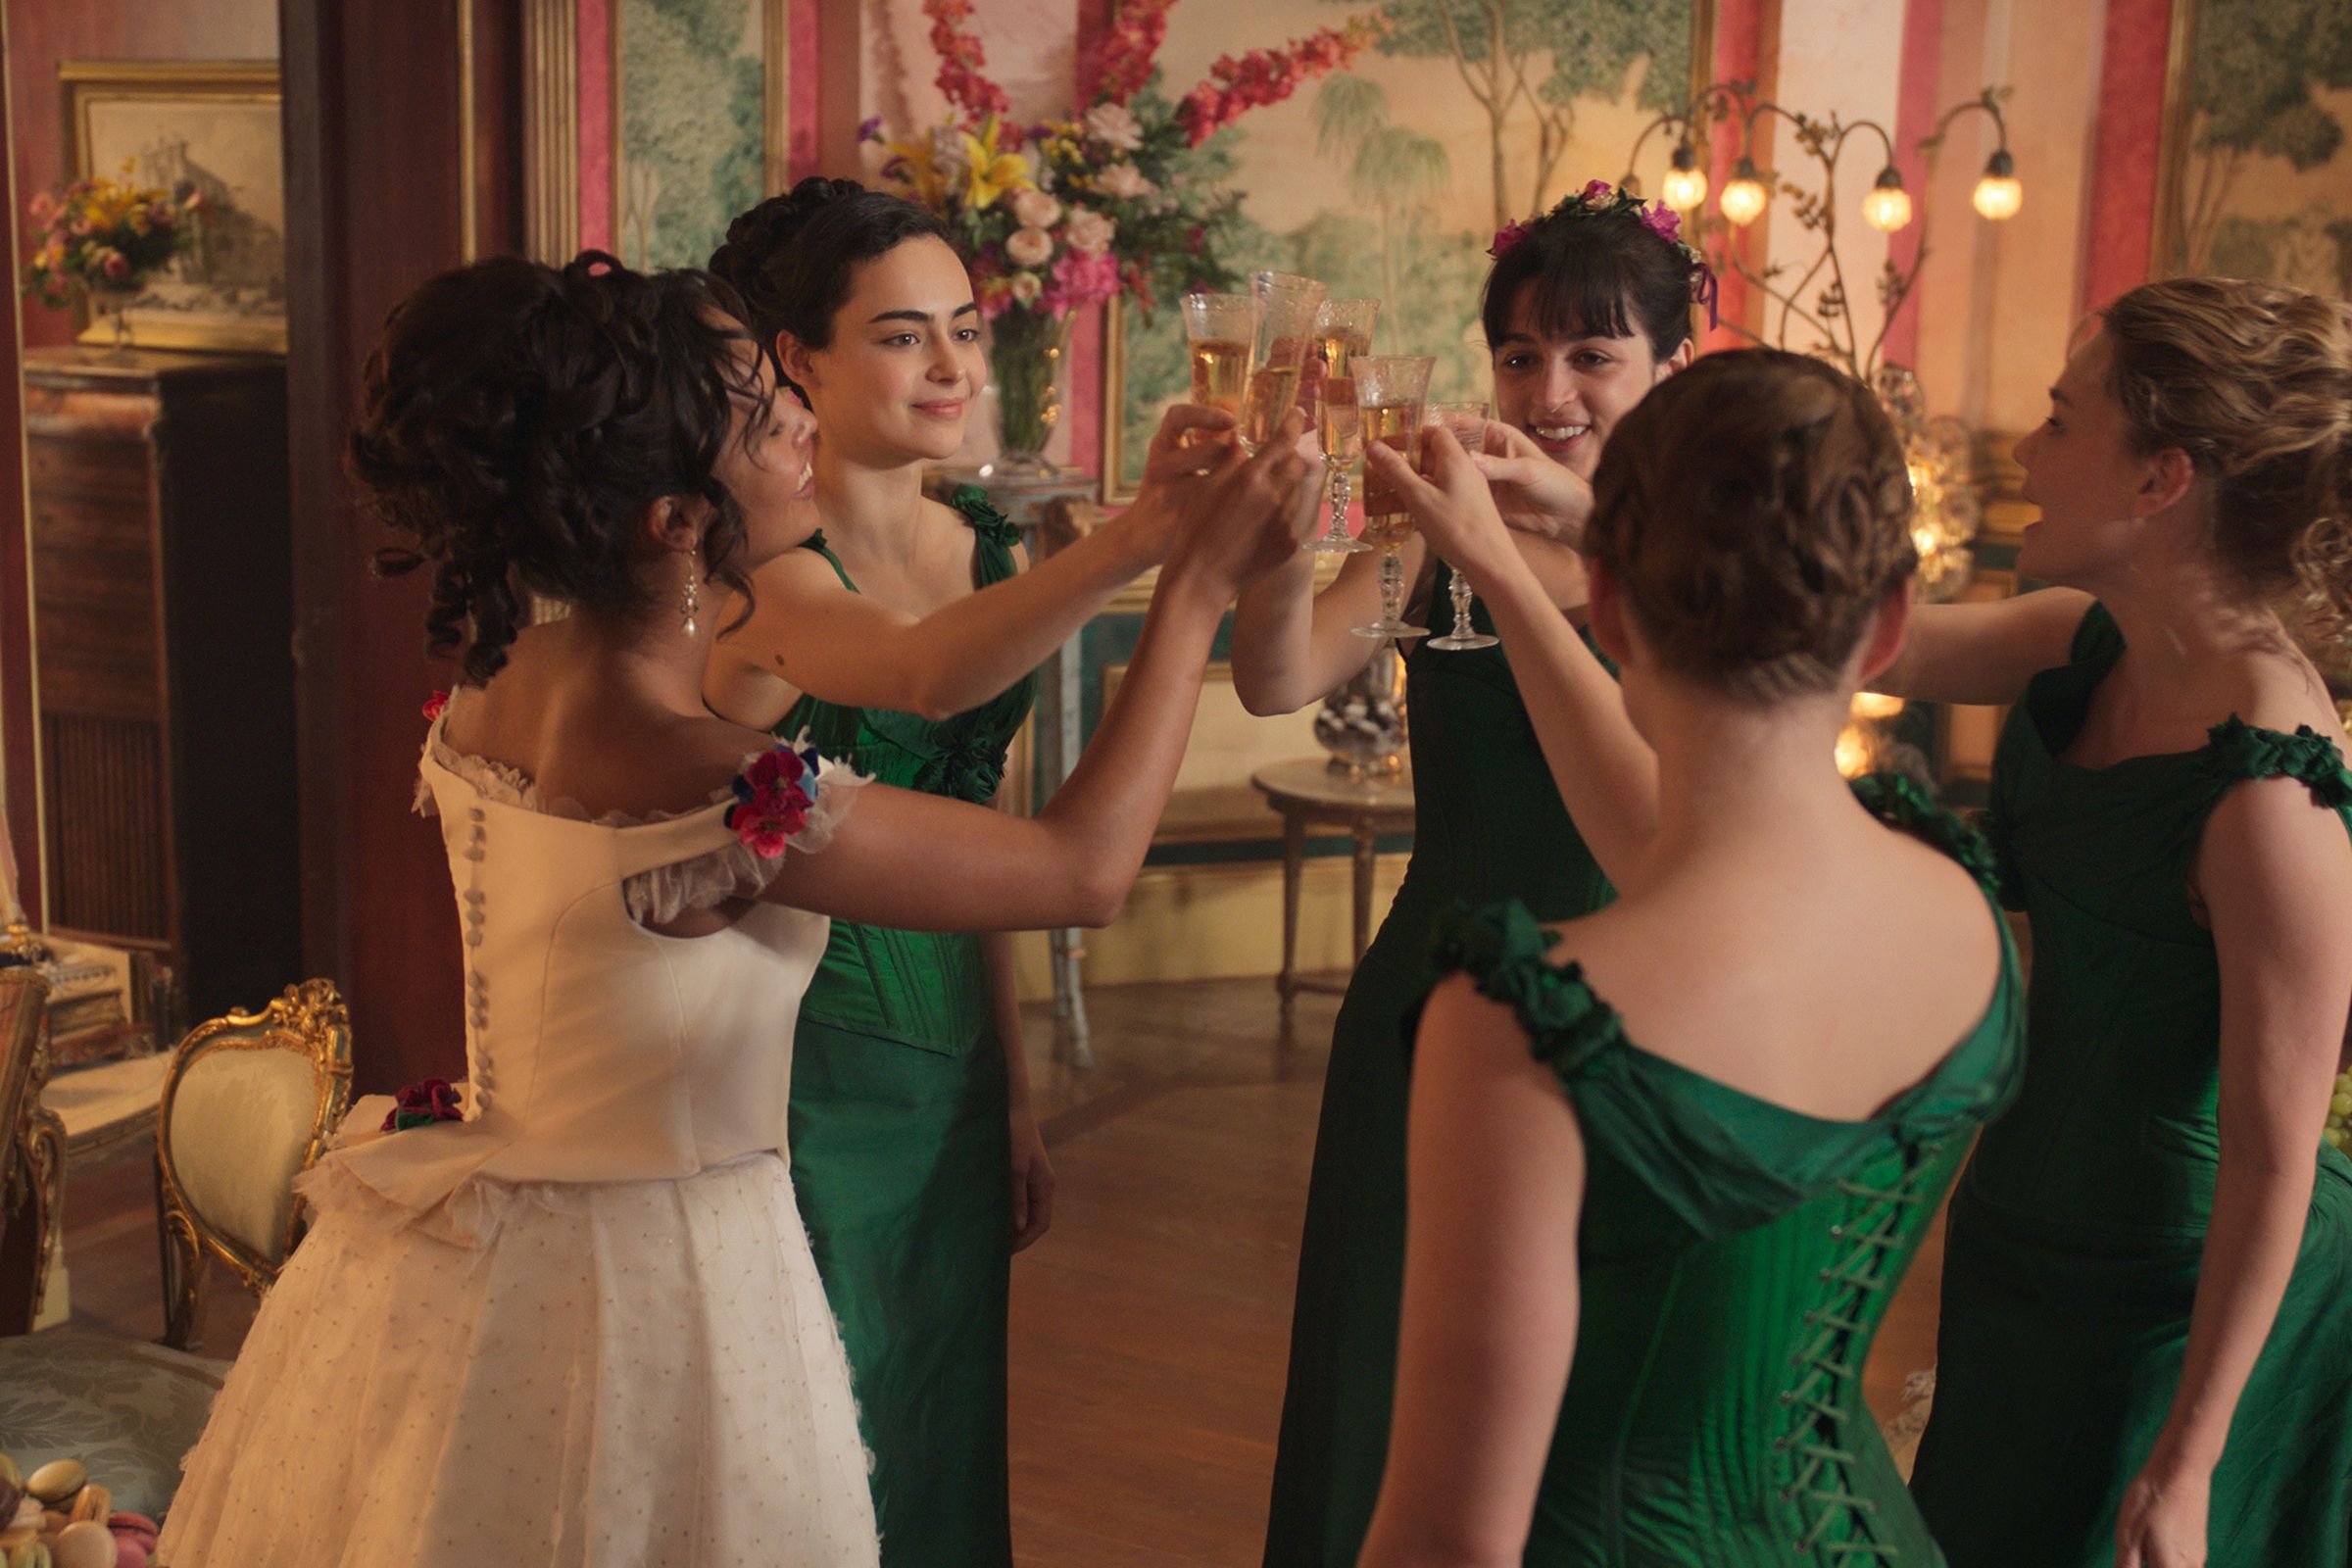 Five women, one in a white wedding dress and four in green bridesmaid dresses, toast in a very colorful and vibrantly pink room.